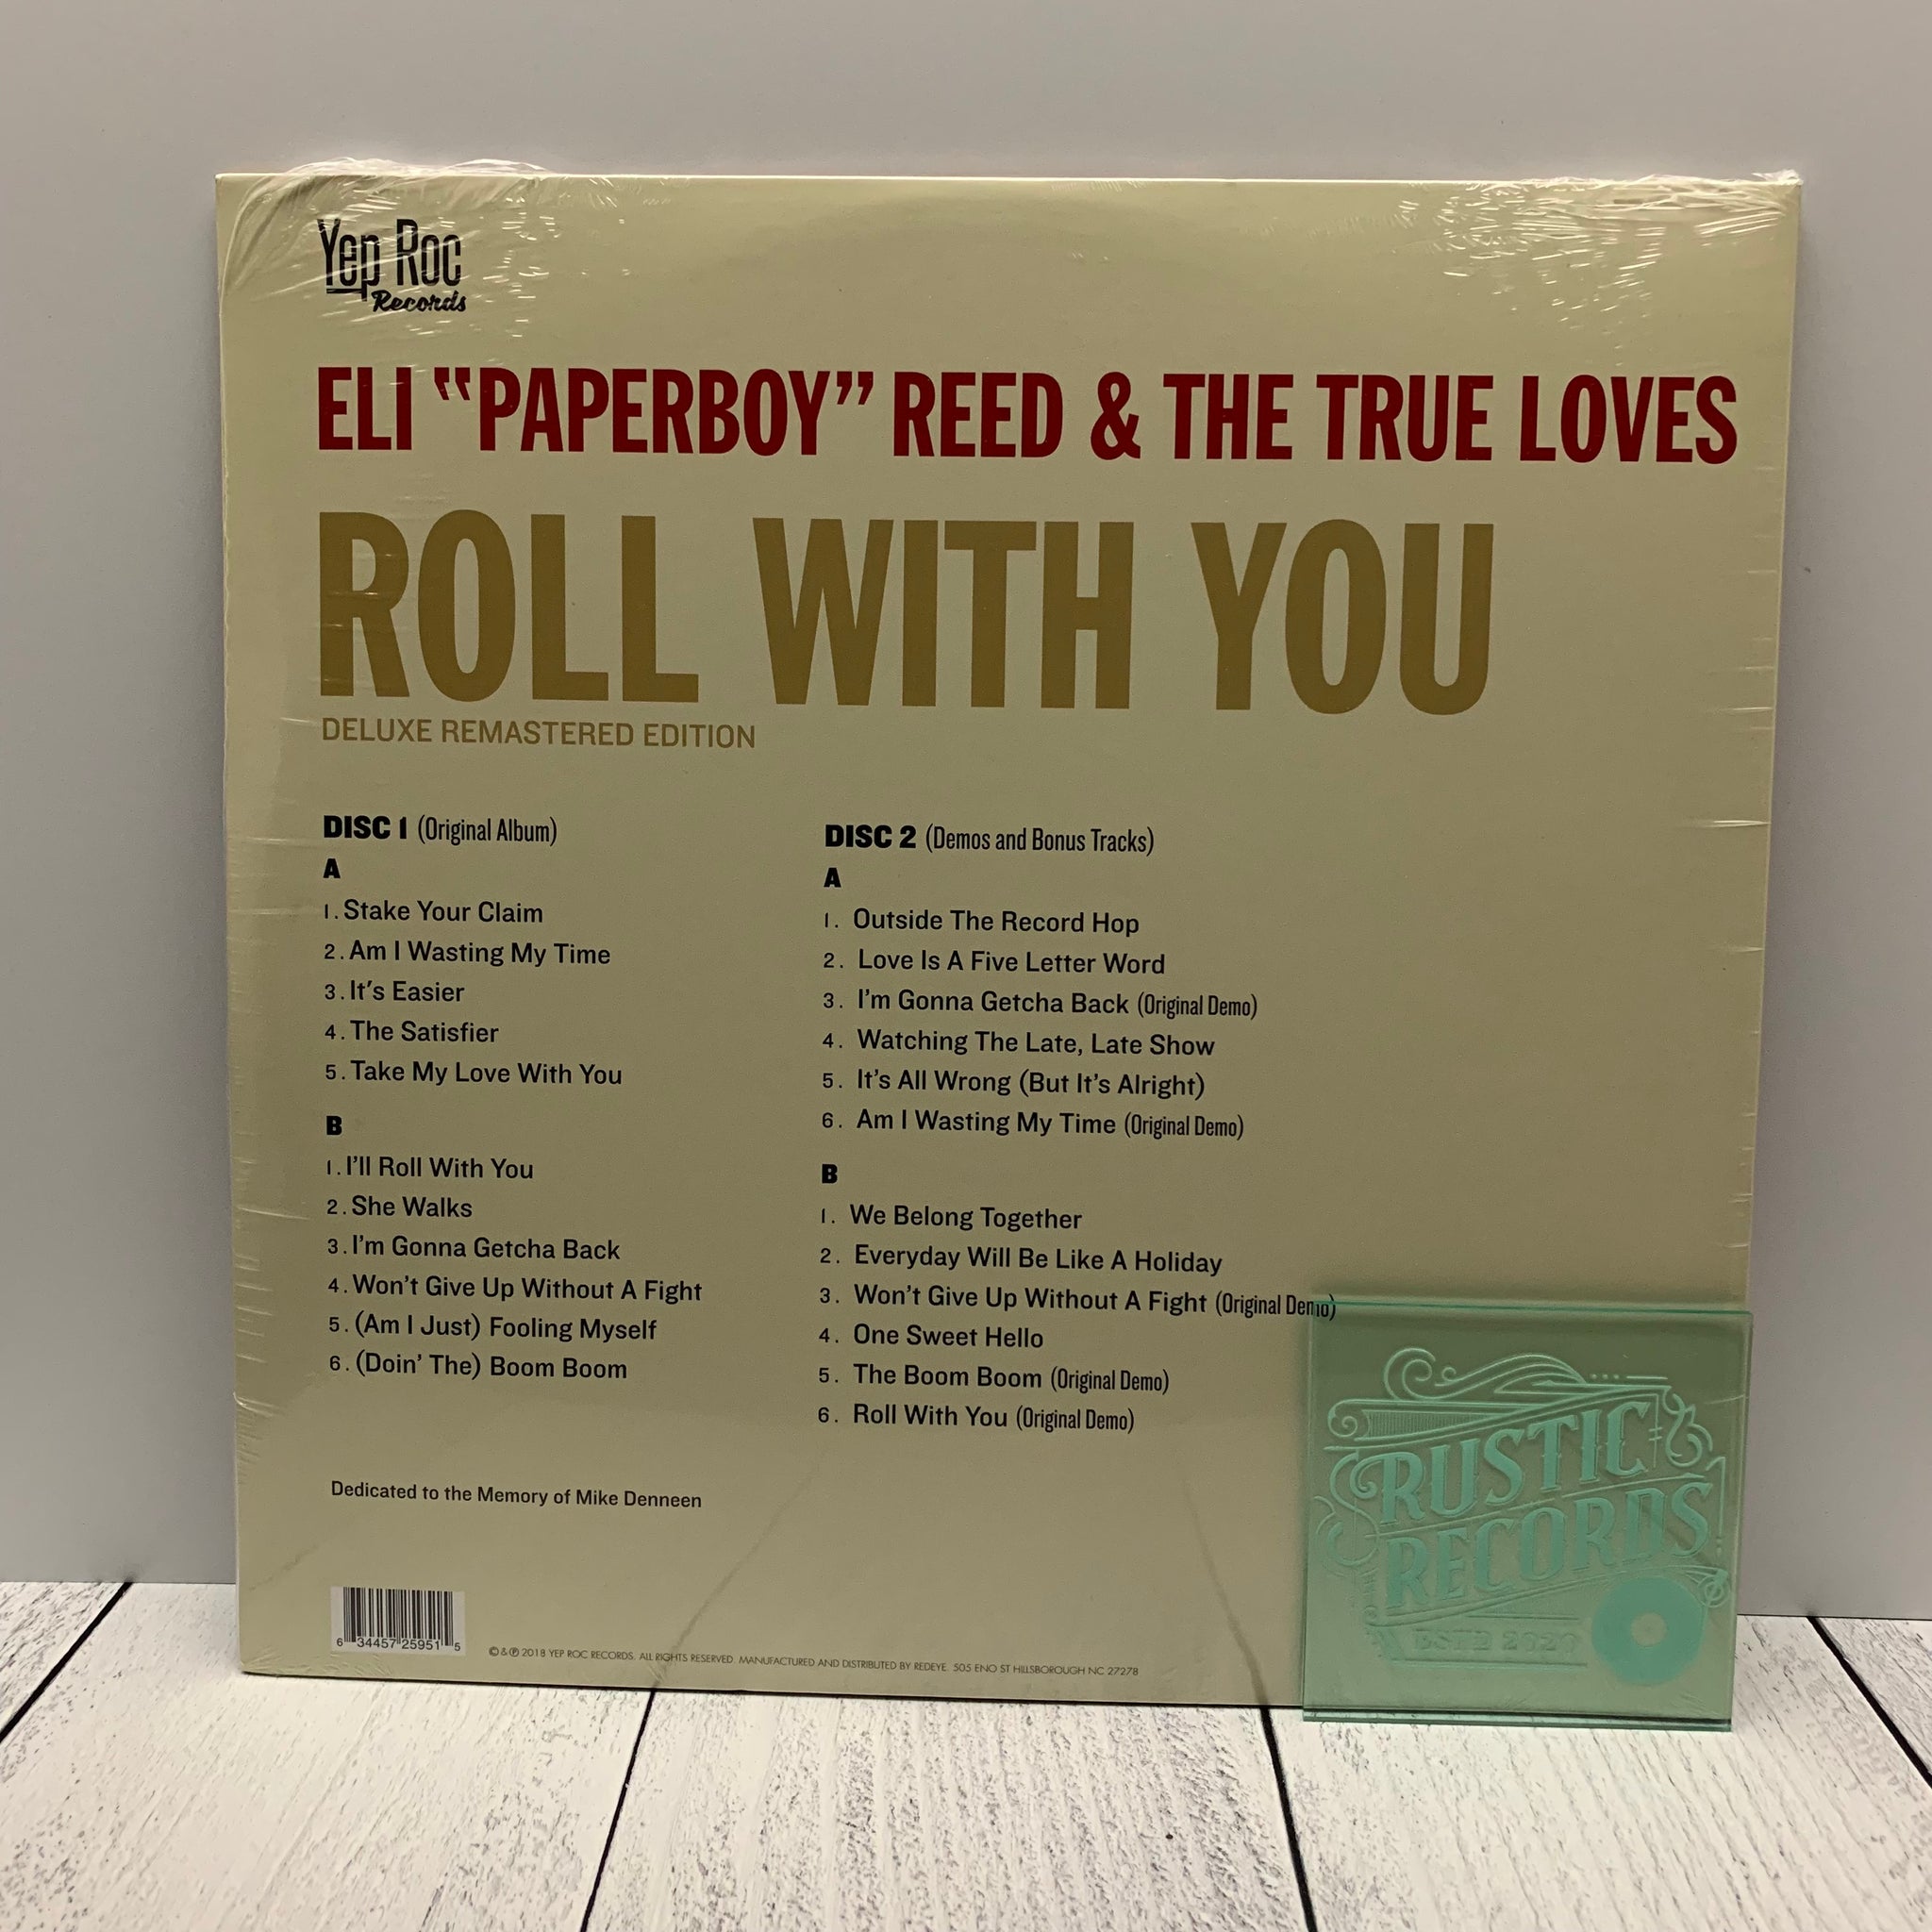 Eli "Paperboy" Reed & The True Loves - Roll With You